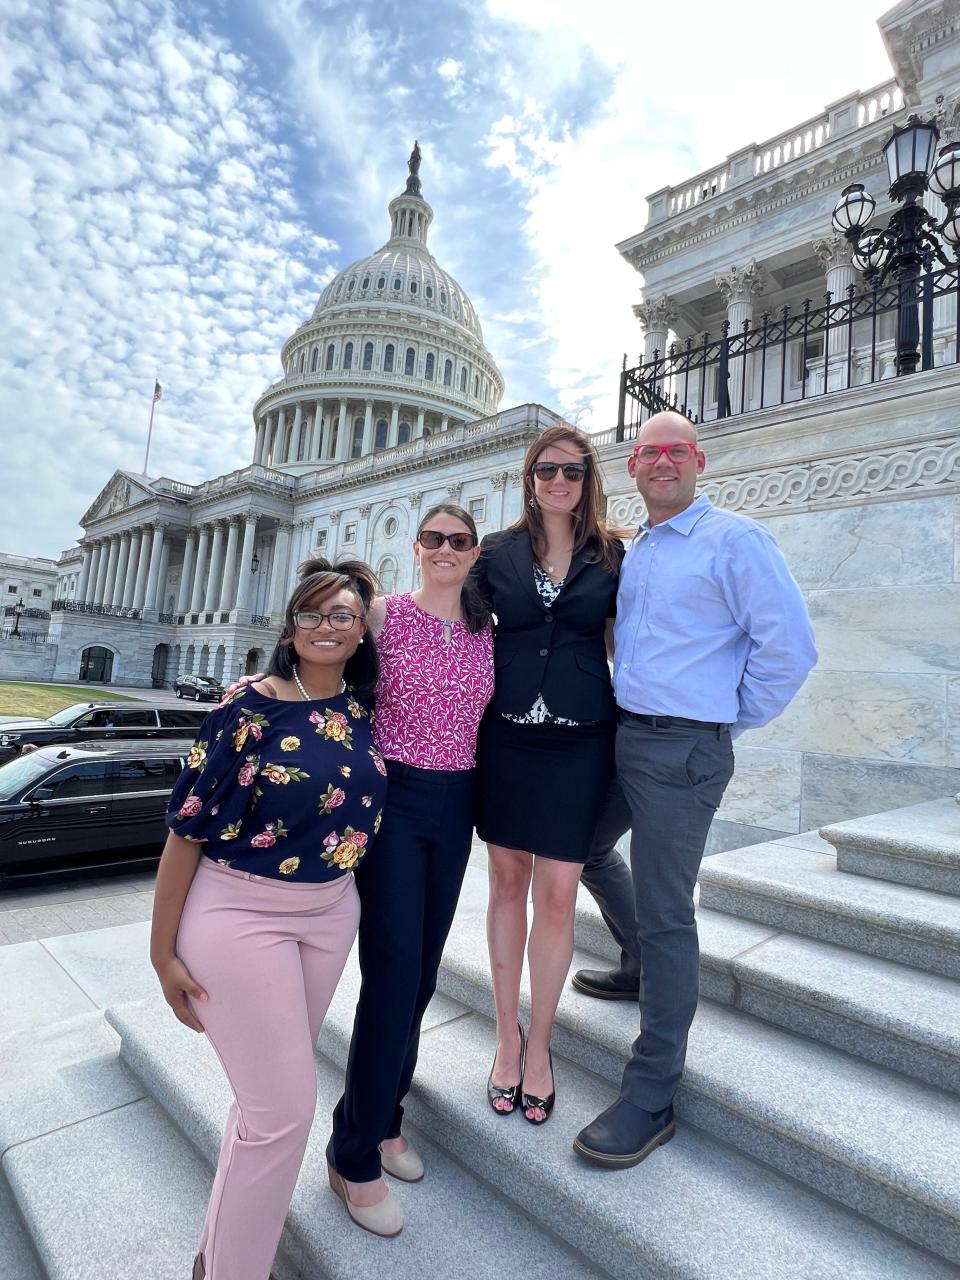 Whitney Austin, second from right, with her husband, Waller, far right, and friends at the U.S. Capitol. Austin, a shooting survivor, spent weeks in Washington in the run-up to the historic passage of the first major gun control act in decades.